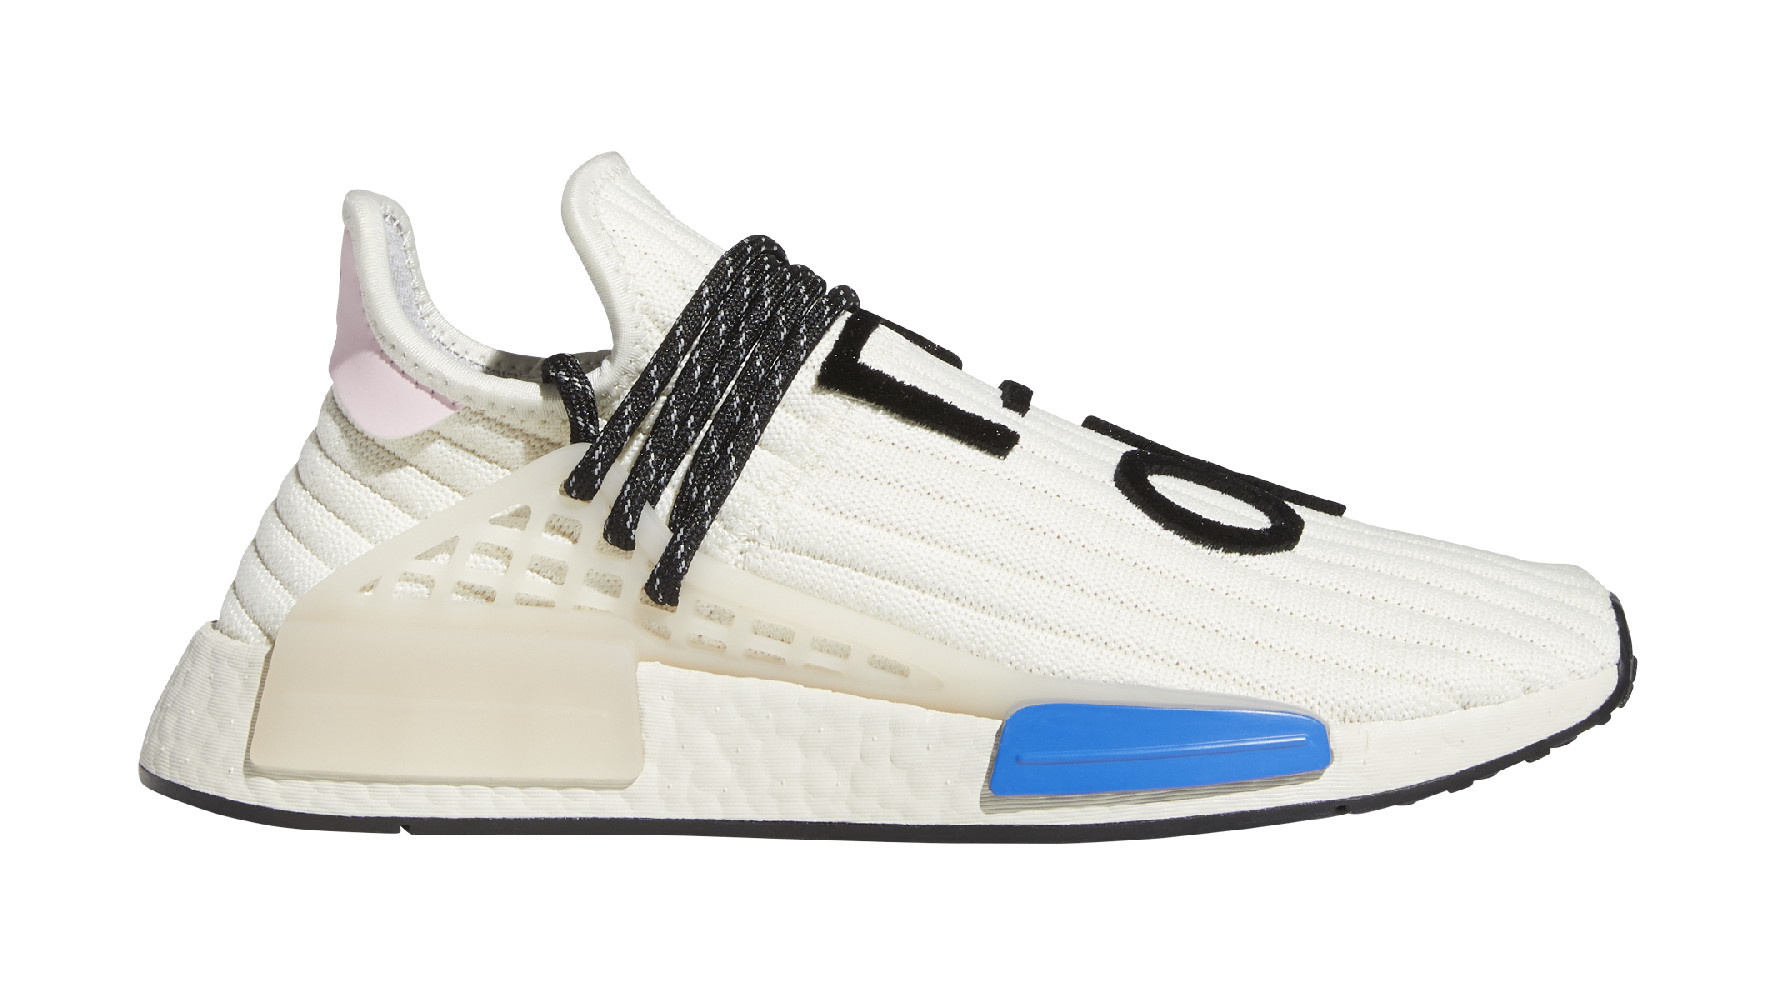 Pharrell x Adidas NMD 'Cream' Release Date Q46454 | Sole Collector